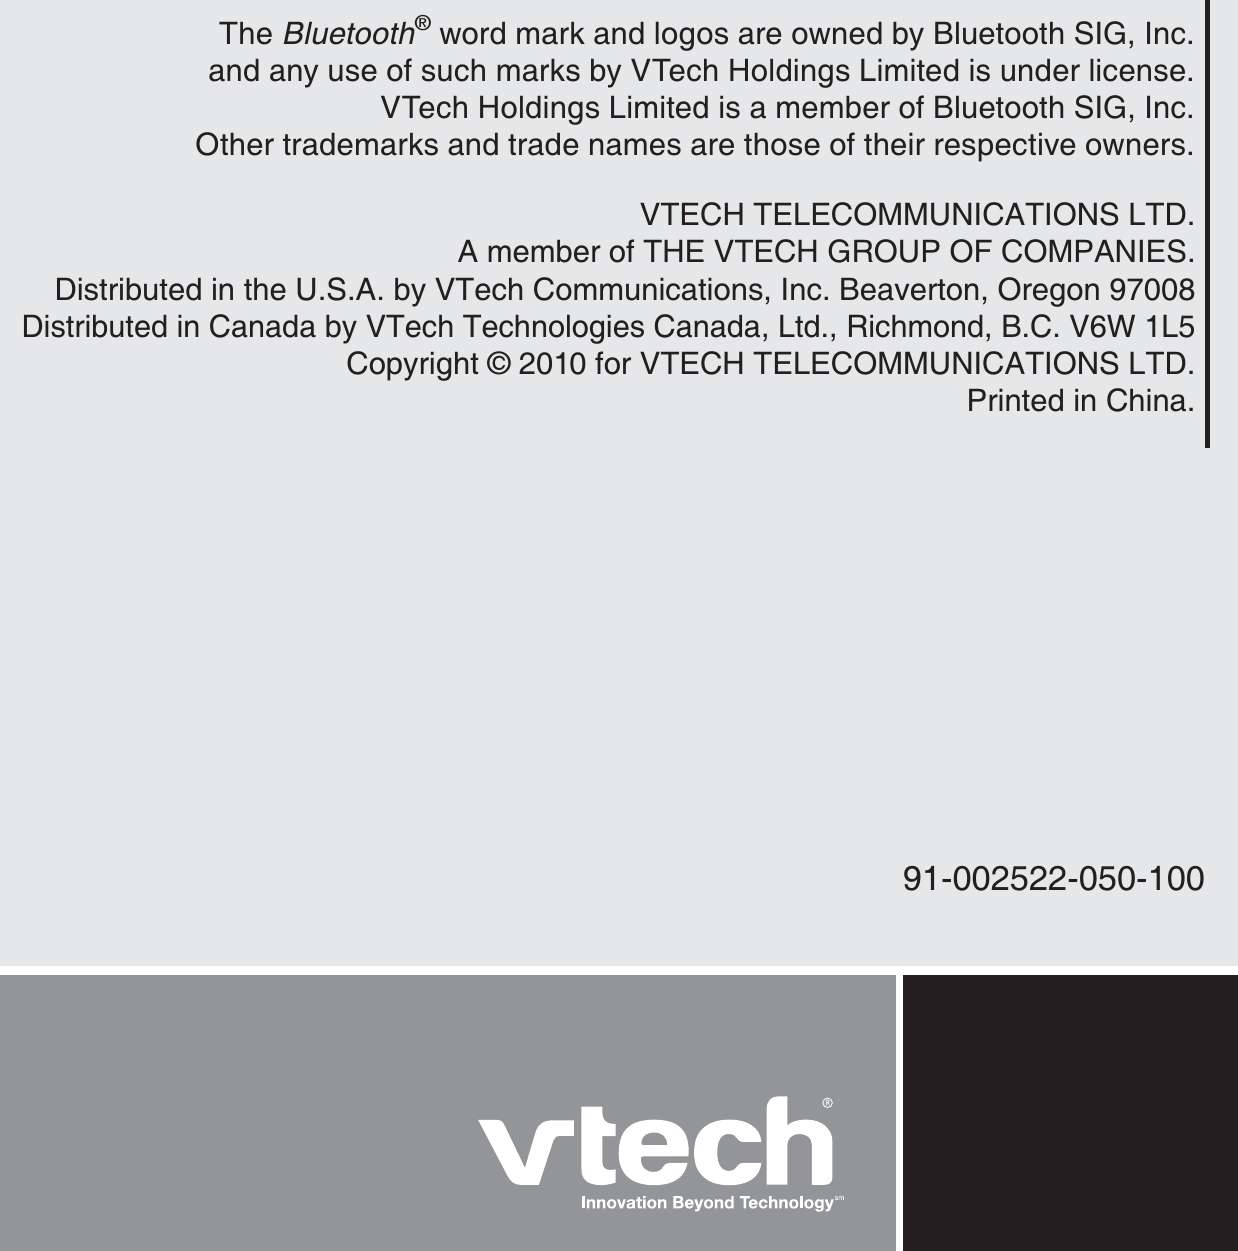 VTECH TELECOMMUNICATIONS LTD.A member of THE VTECH GROUP OF COMPANIES.Distributed in the U.S.A. by VTech Communications, Inc. Beaverton, Oregon 97008Distributed in Canada by VTech Technologies Canada, Ltd., Richmond, B.C. V6W 1L5Copyright © 2010 for VTECH TELECOMMUNICATIONS LTD.Printed in China.91-002522-050-100The Bluetooth® word mark and logos are owned by Bluetooth SIG, Inc. and any use of such marks by VTech Holdings Limited is under license. VTech Holdings Limited is a member of Bluetooth SIG, Inc. Other trademarks and trade names are those of their respective owners.